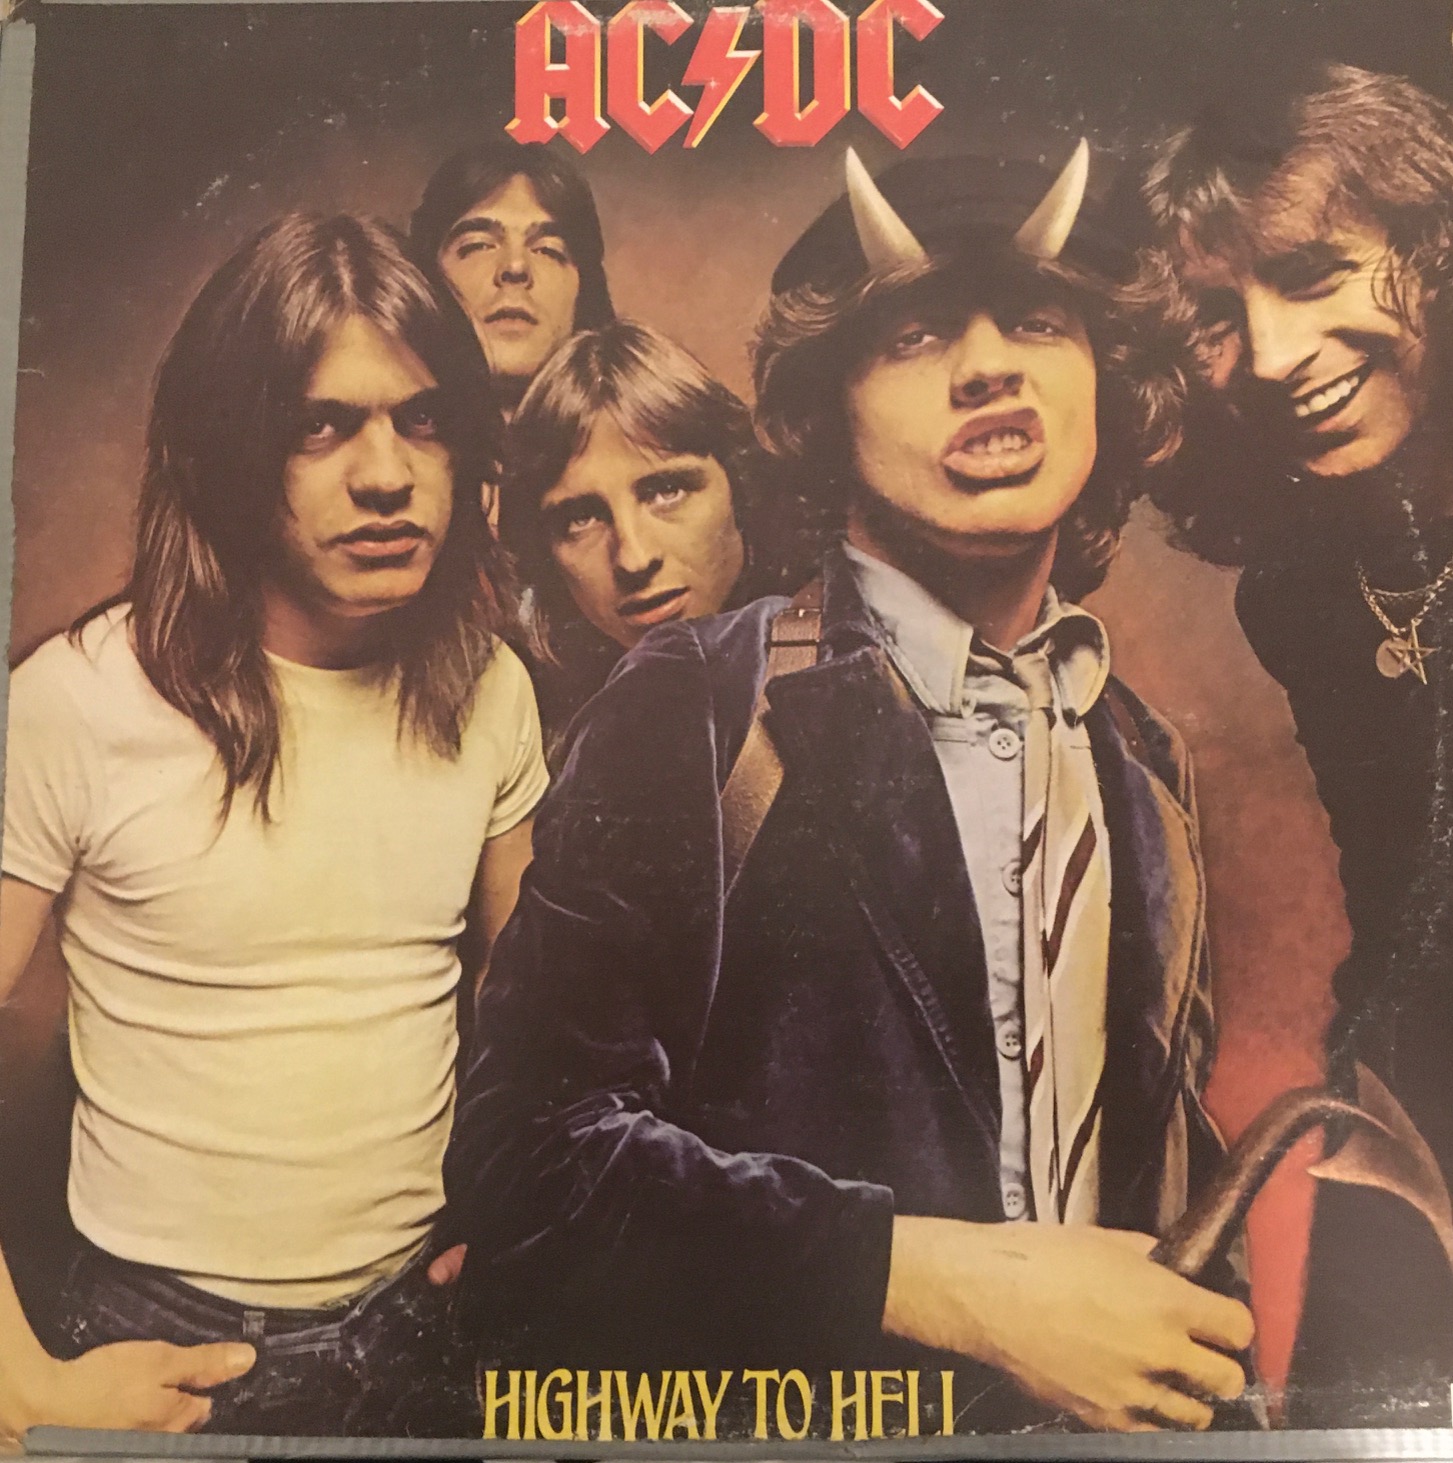 Acdc highway to hell. AC DC Highway to Hell обложка. Обложка альбома Highway to Hell. Плакат AC DC Highway to Hell. AC DC Highway to Hell 1979 обложка CD.